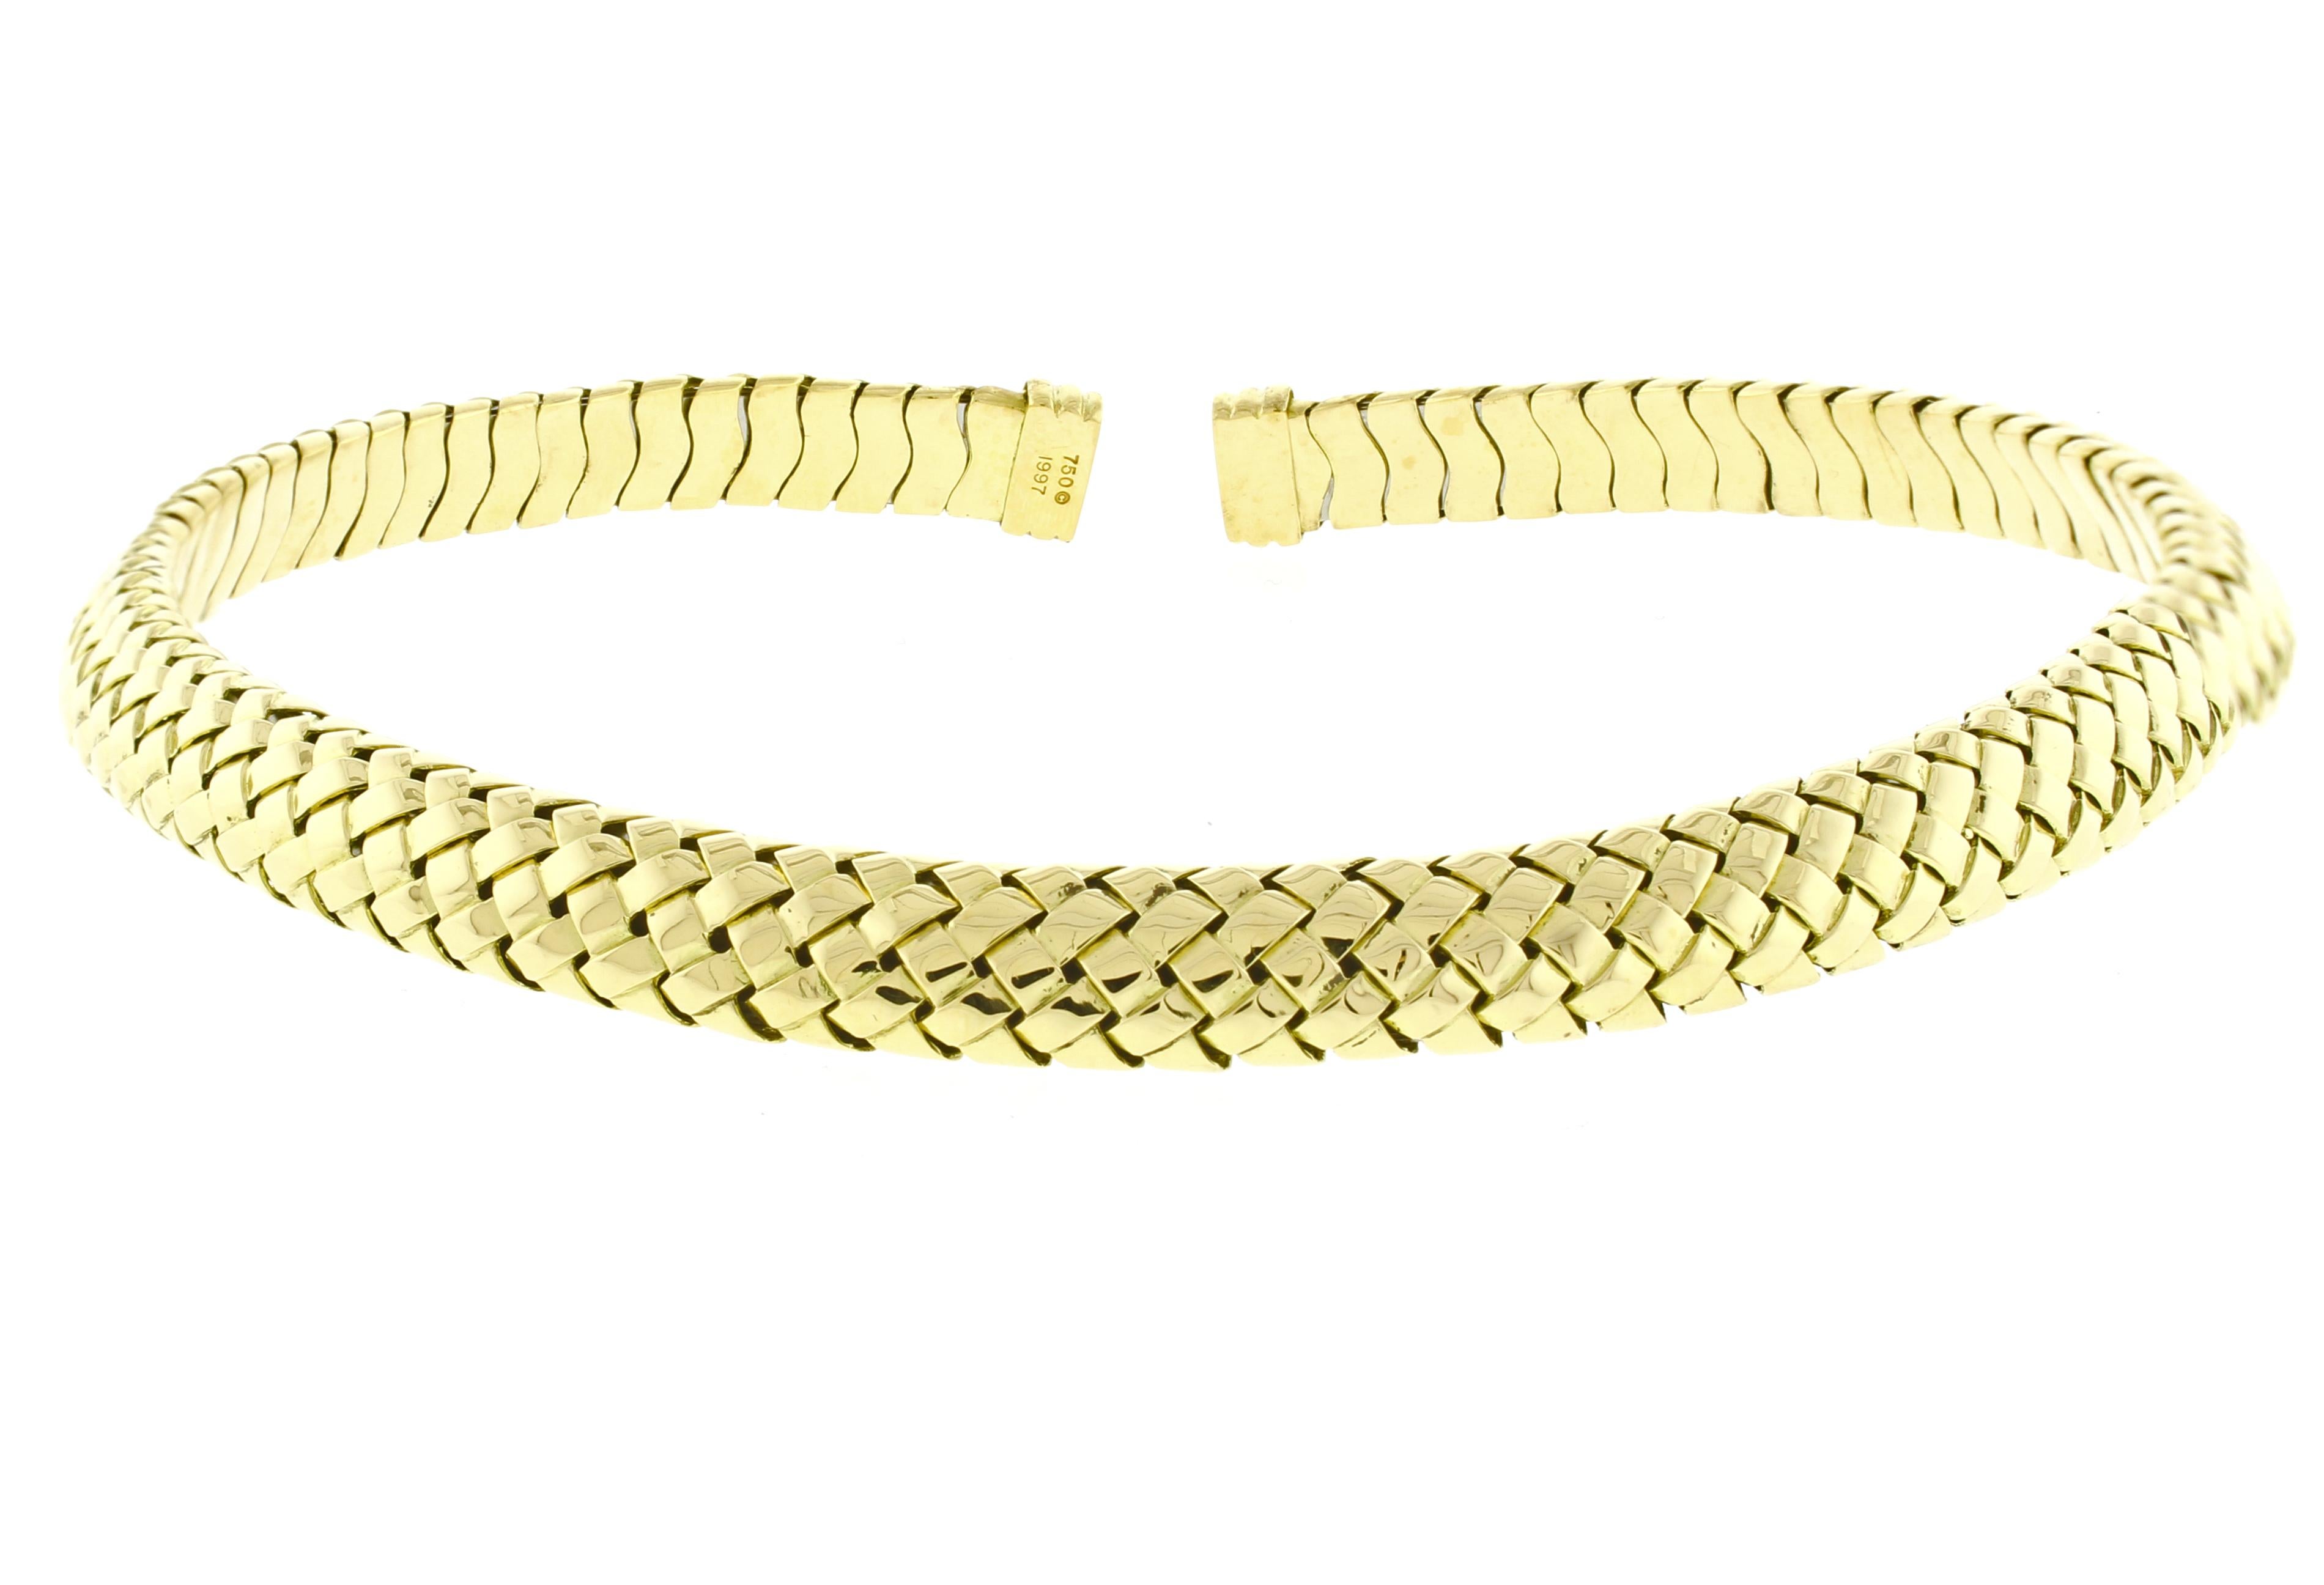 Tiffany Vannerie mesh 18 karat  gold woven necklace. Flexible opening to fit .
♦ Designer: Tiffany & Co.
♦ Metal: 18 karat
♦ Circa 2000
♦ 86 grams
♦ fits a 12-14 inch neck, average to slender
♦ Packaging: Pampillonia presentation box 
♦ Condition: